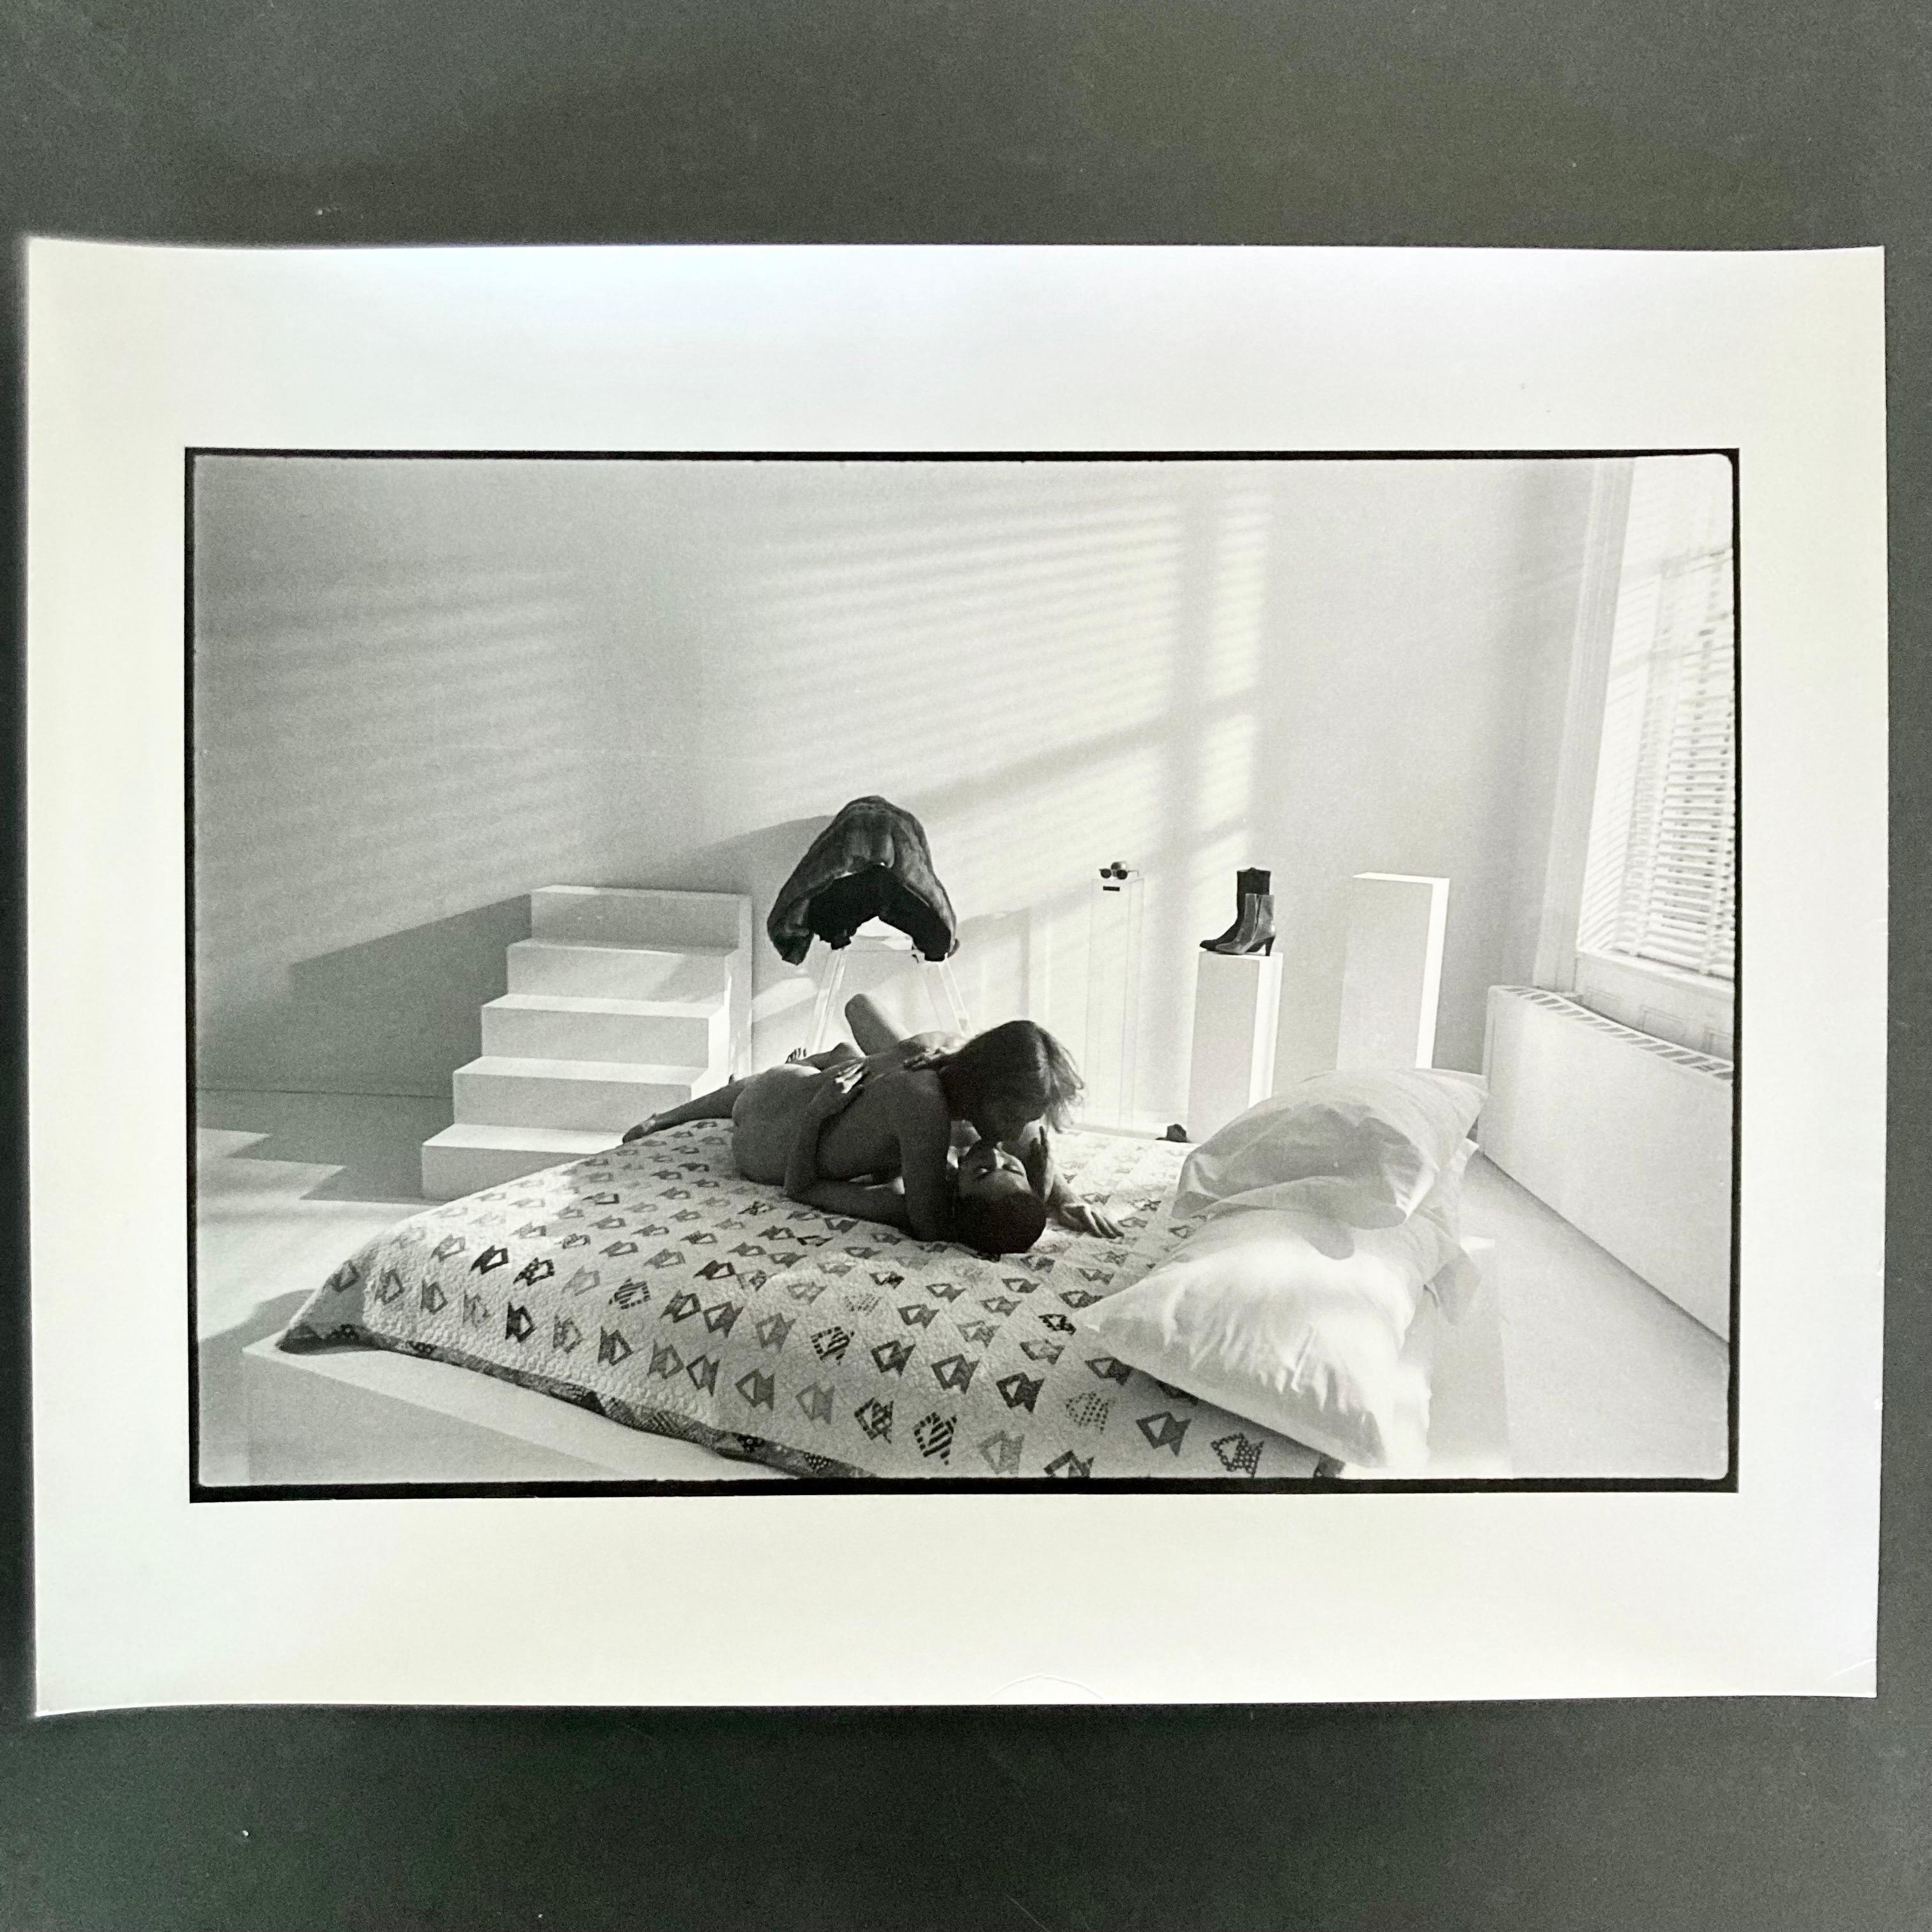 Vintage darkroom print of John Lennon and Yoko Ono taken in New York , naked in bed, November 26th 1980. This print is an original, hand printed darkroom print made by the photographer Allan Tannenbaum. 

This vintage 11x14" print is signed and